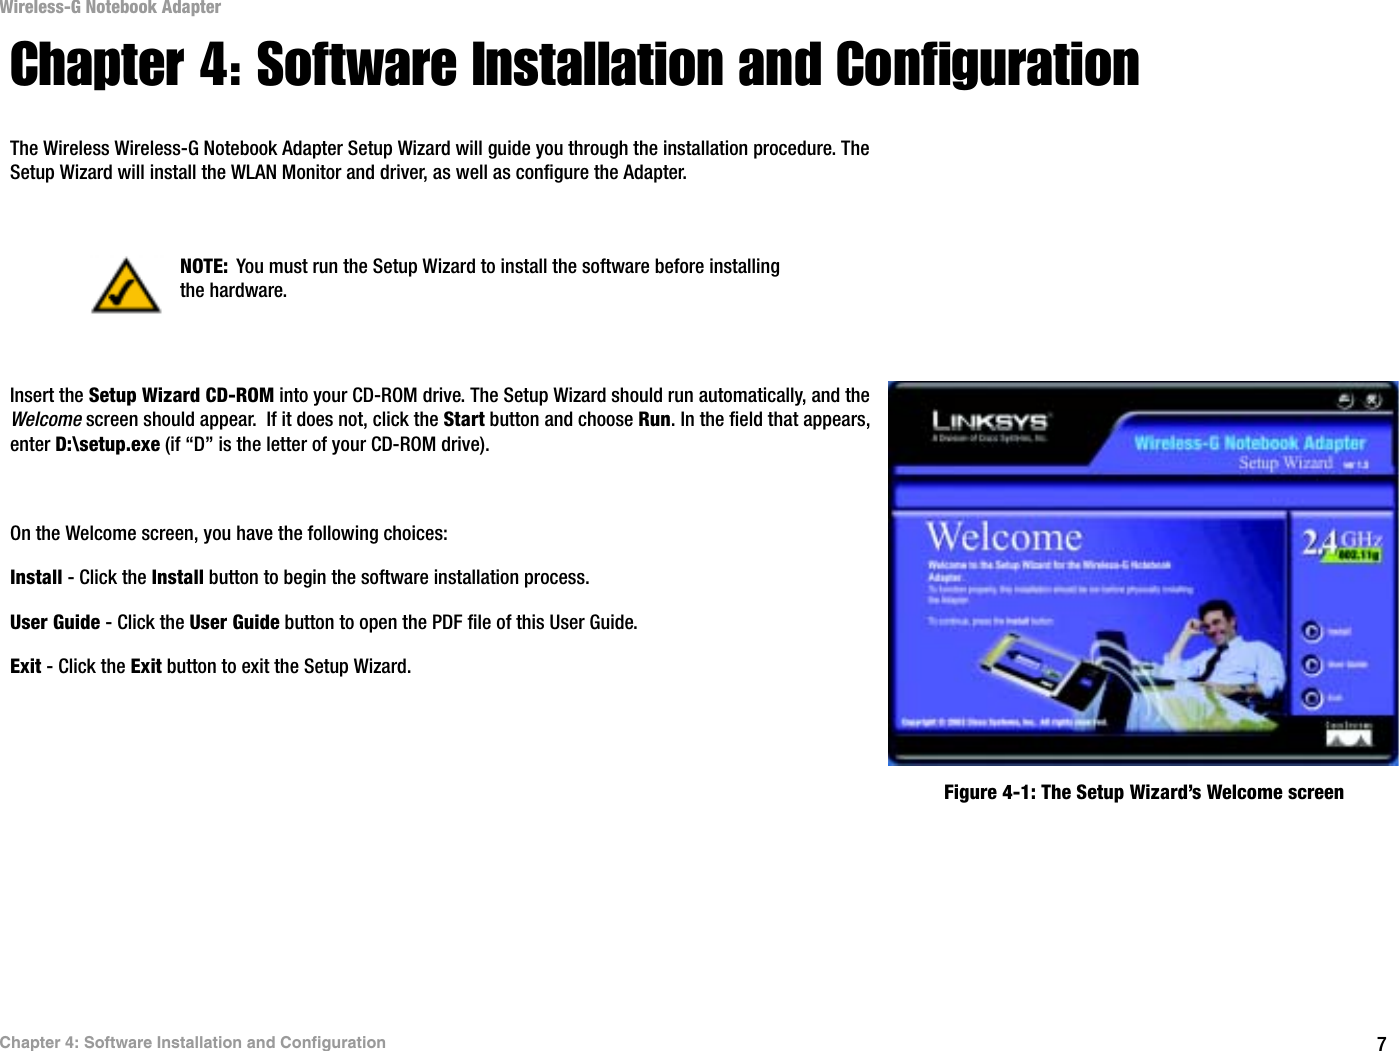 7Chapter 4: Software Installation and ConfigurationWireless-G Notebook AdapterChapter 4: Software Installation and ConfigurationThe Wireless Wireless-G Notebook Adapter Setup Wizard will guide you through the installation procedure. The Setup Wizard will install the WLAN Monitor and driver, as well as configure the Adapter.Insert the Setup Wizard CD-ROM into your CD-ROM drive. The Setup Wizard should run automatically, and the Welcome screen should appear.  If it does not, click the Start button and choose Run. In the field that appears, enter D:\setup.exe (if “D” is the letter of your CD-ROM drive). On the Welcome screen, you have the following choices:Install - Click the Install button to begin the software installation process. User Guide - Click the User Guide button to open the PDF file of this User Guide. Exit - Click the Exit button to exit the Setup Wizard.NOTE: You must run the Setup Wizard to install the software before installing the hardware.Figure 4-1: The Setup Wizard’s Welcome screen